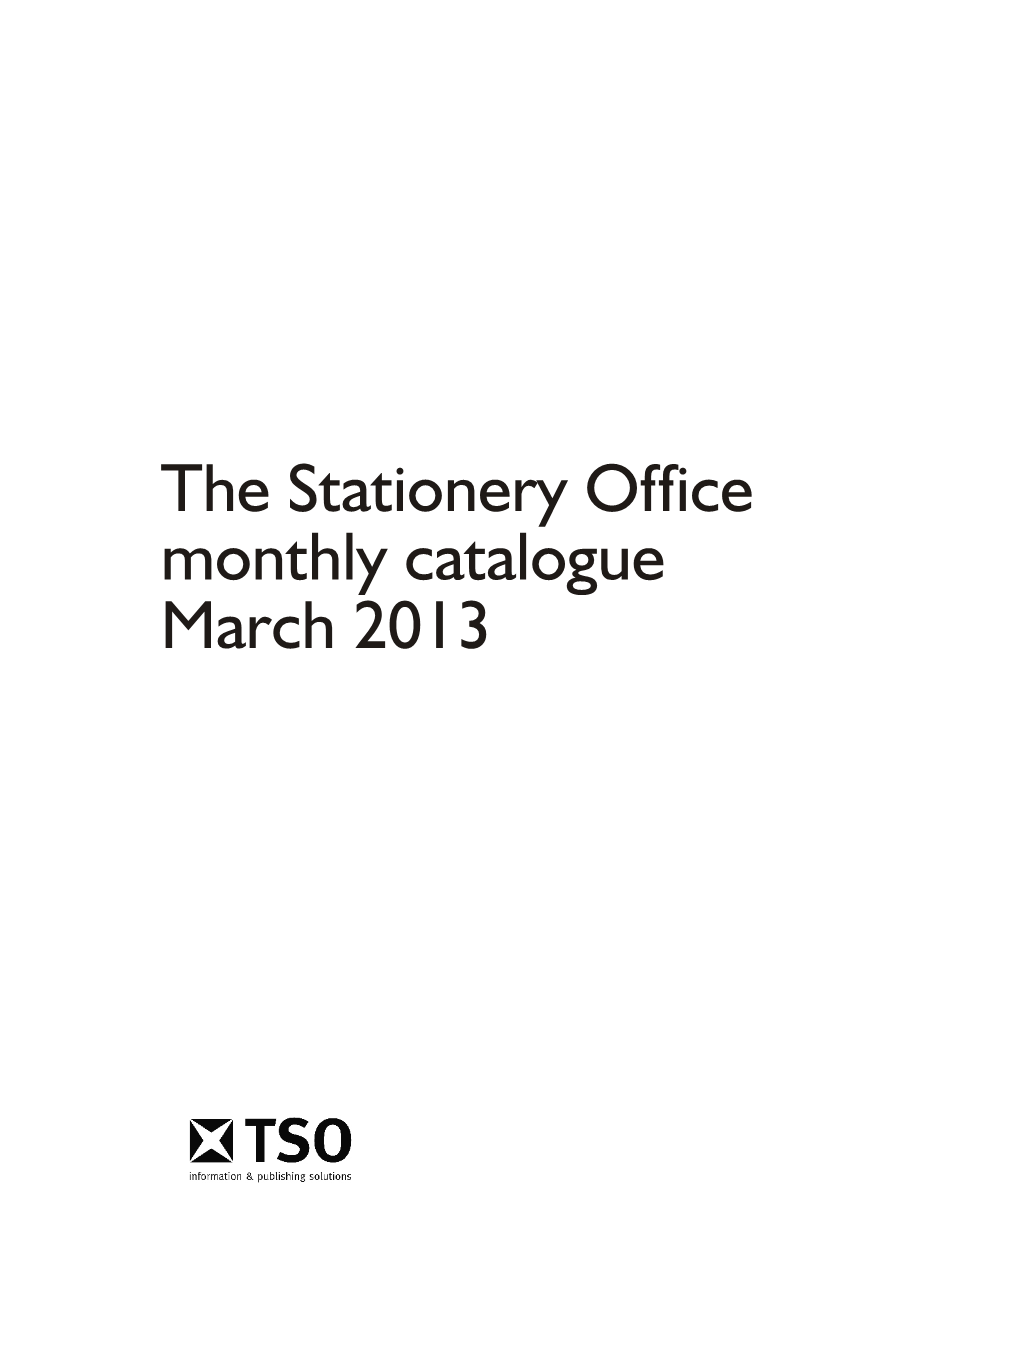 The Stationery Office Monthly Catalogue March 2013 Ii